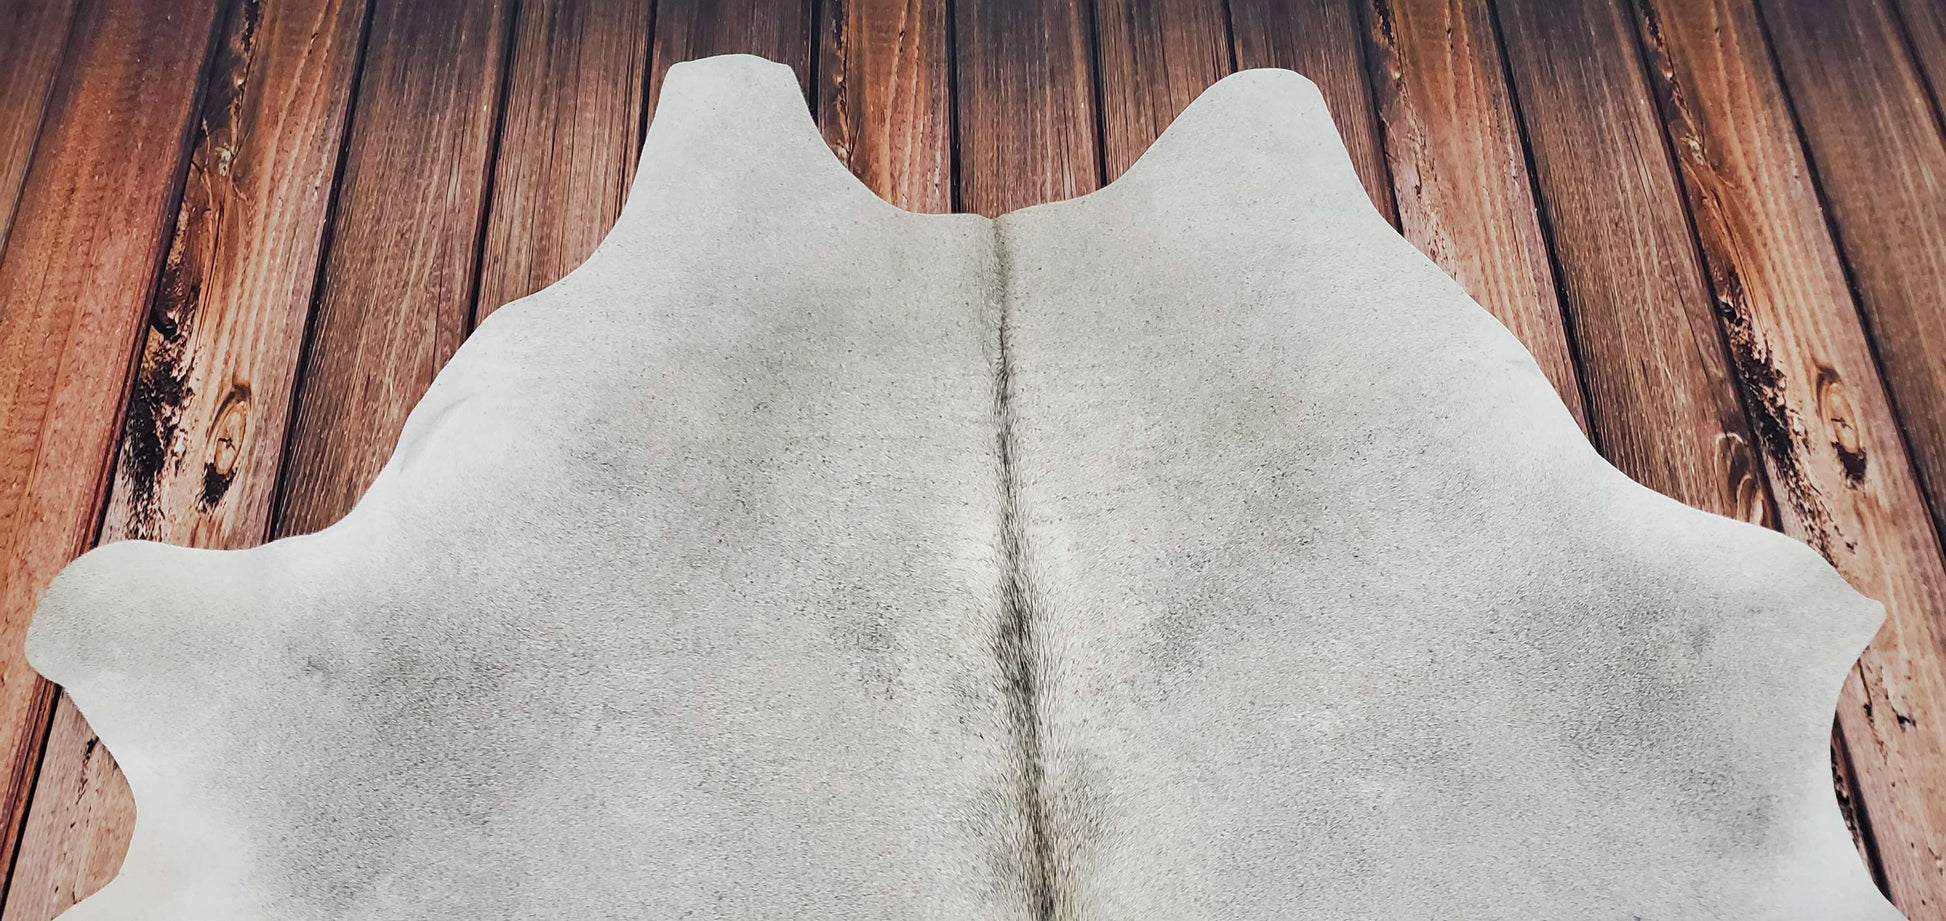 The grey colour of the cowhide also makes it ideal for use in darker spaces, as it will help to reflect light and brighten up the room.